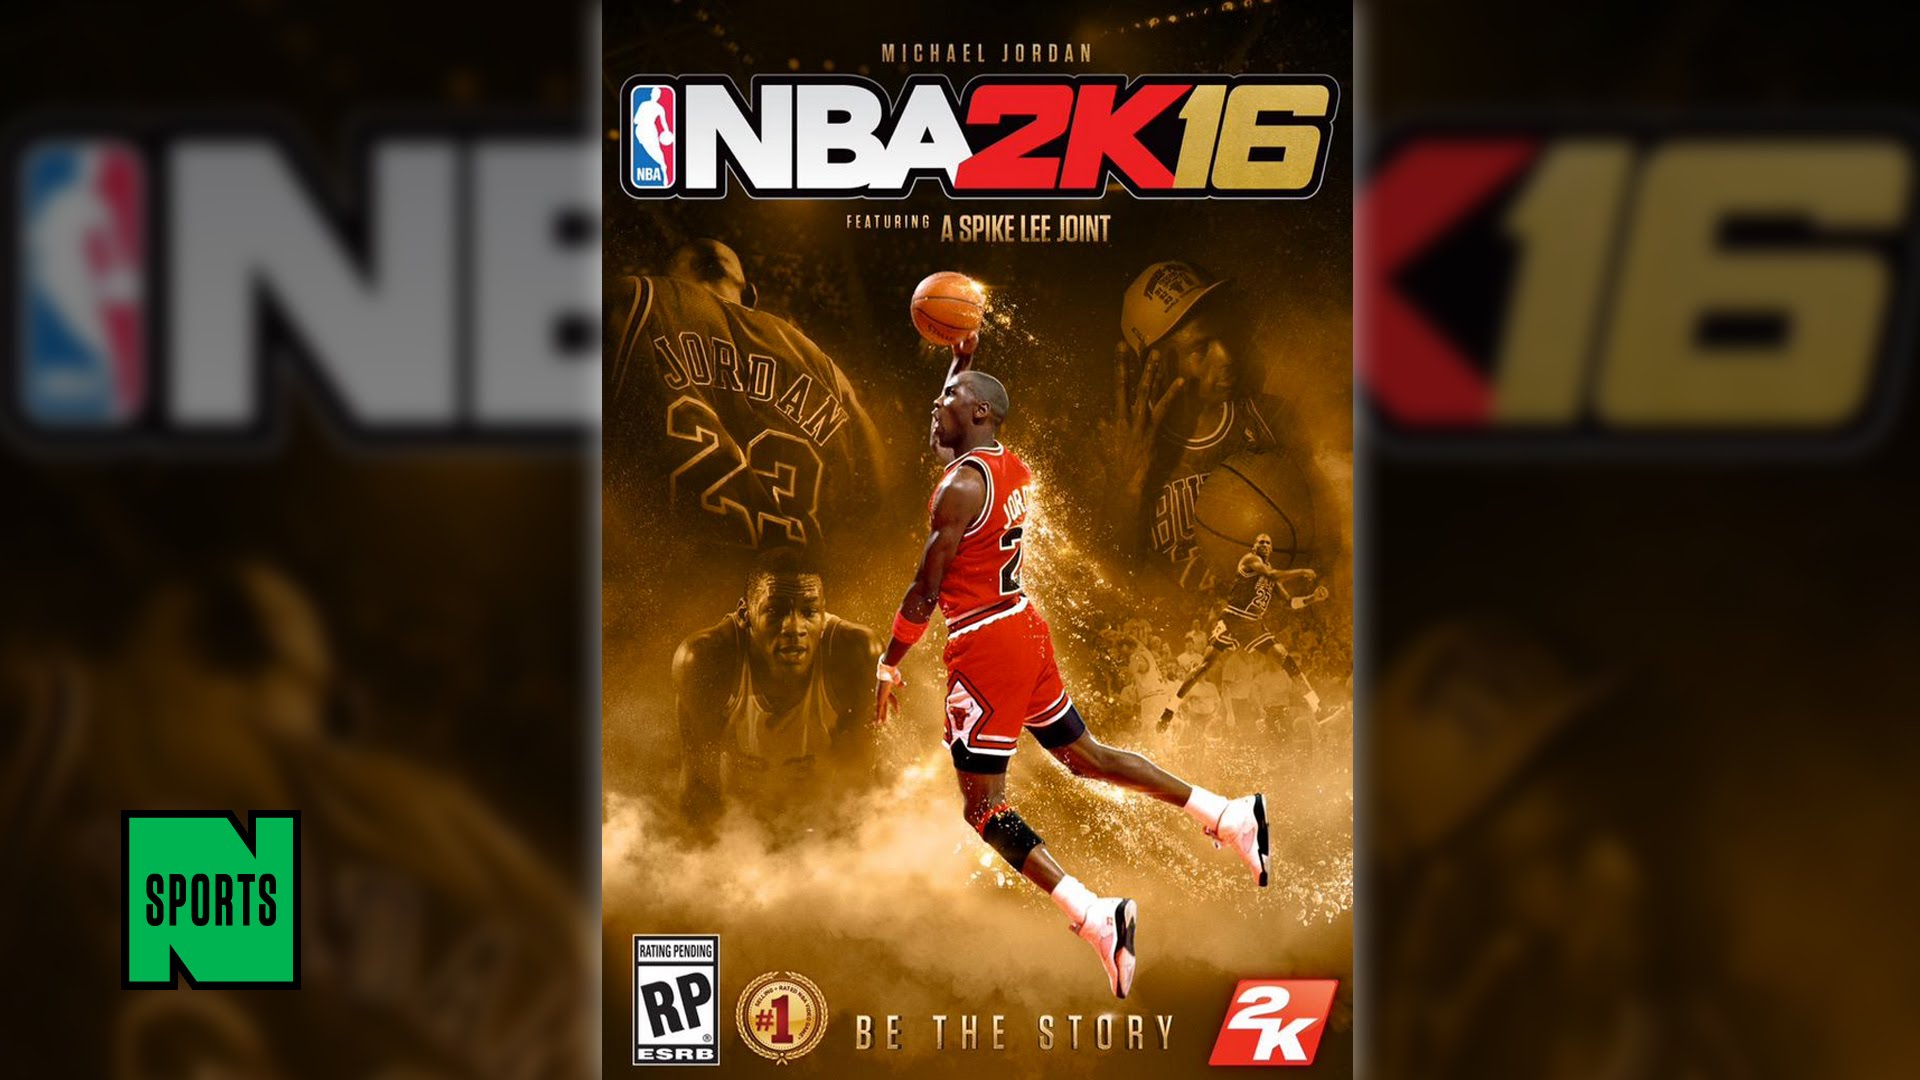 NBA 2K16 to Drop a Special Edition Version With Michael